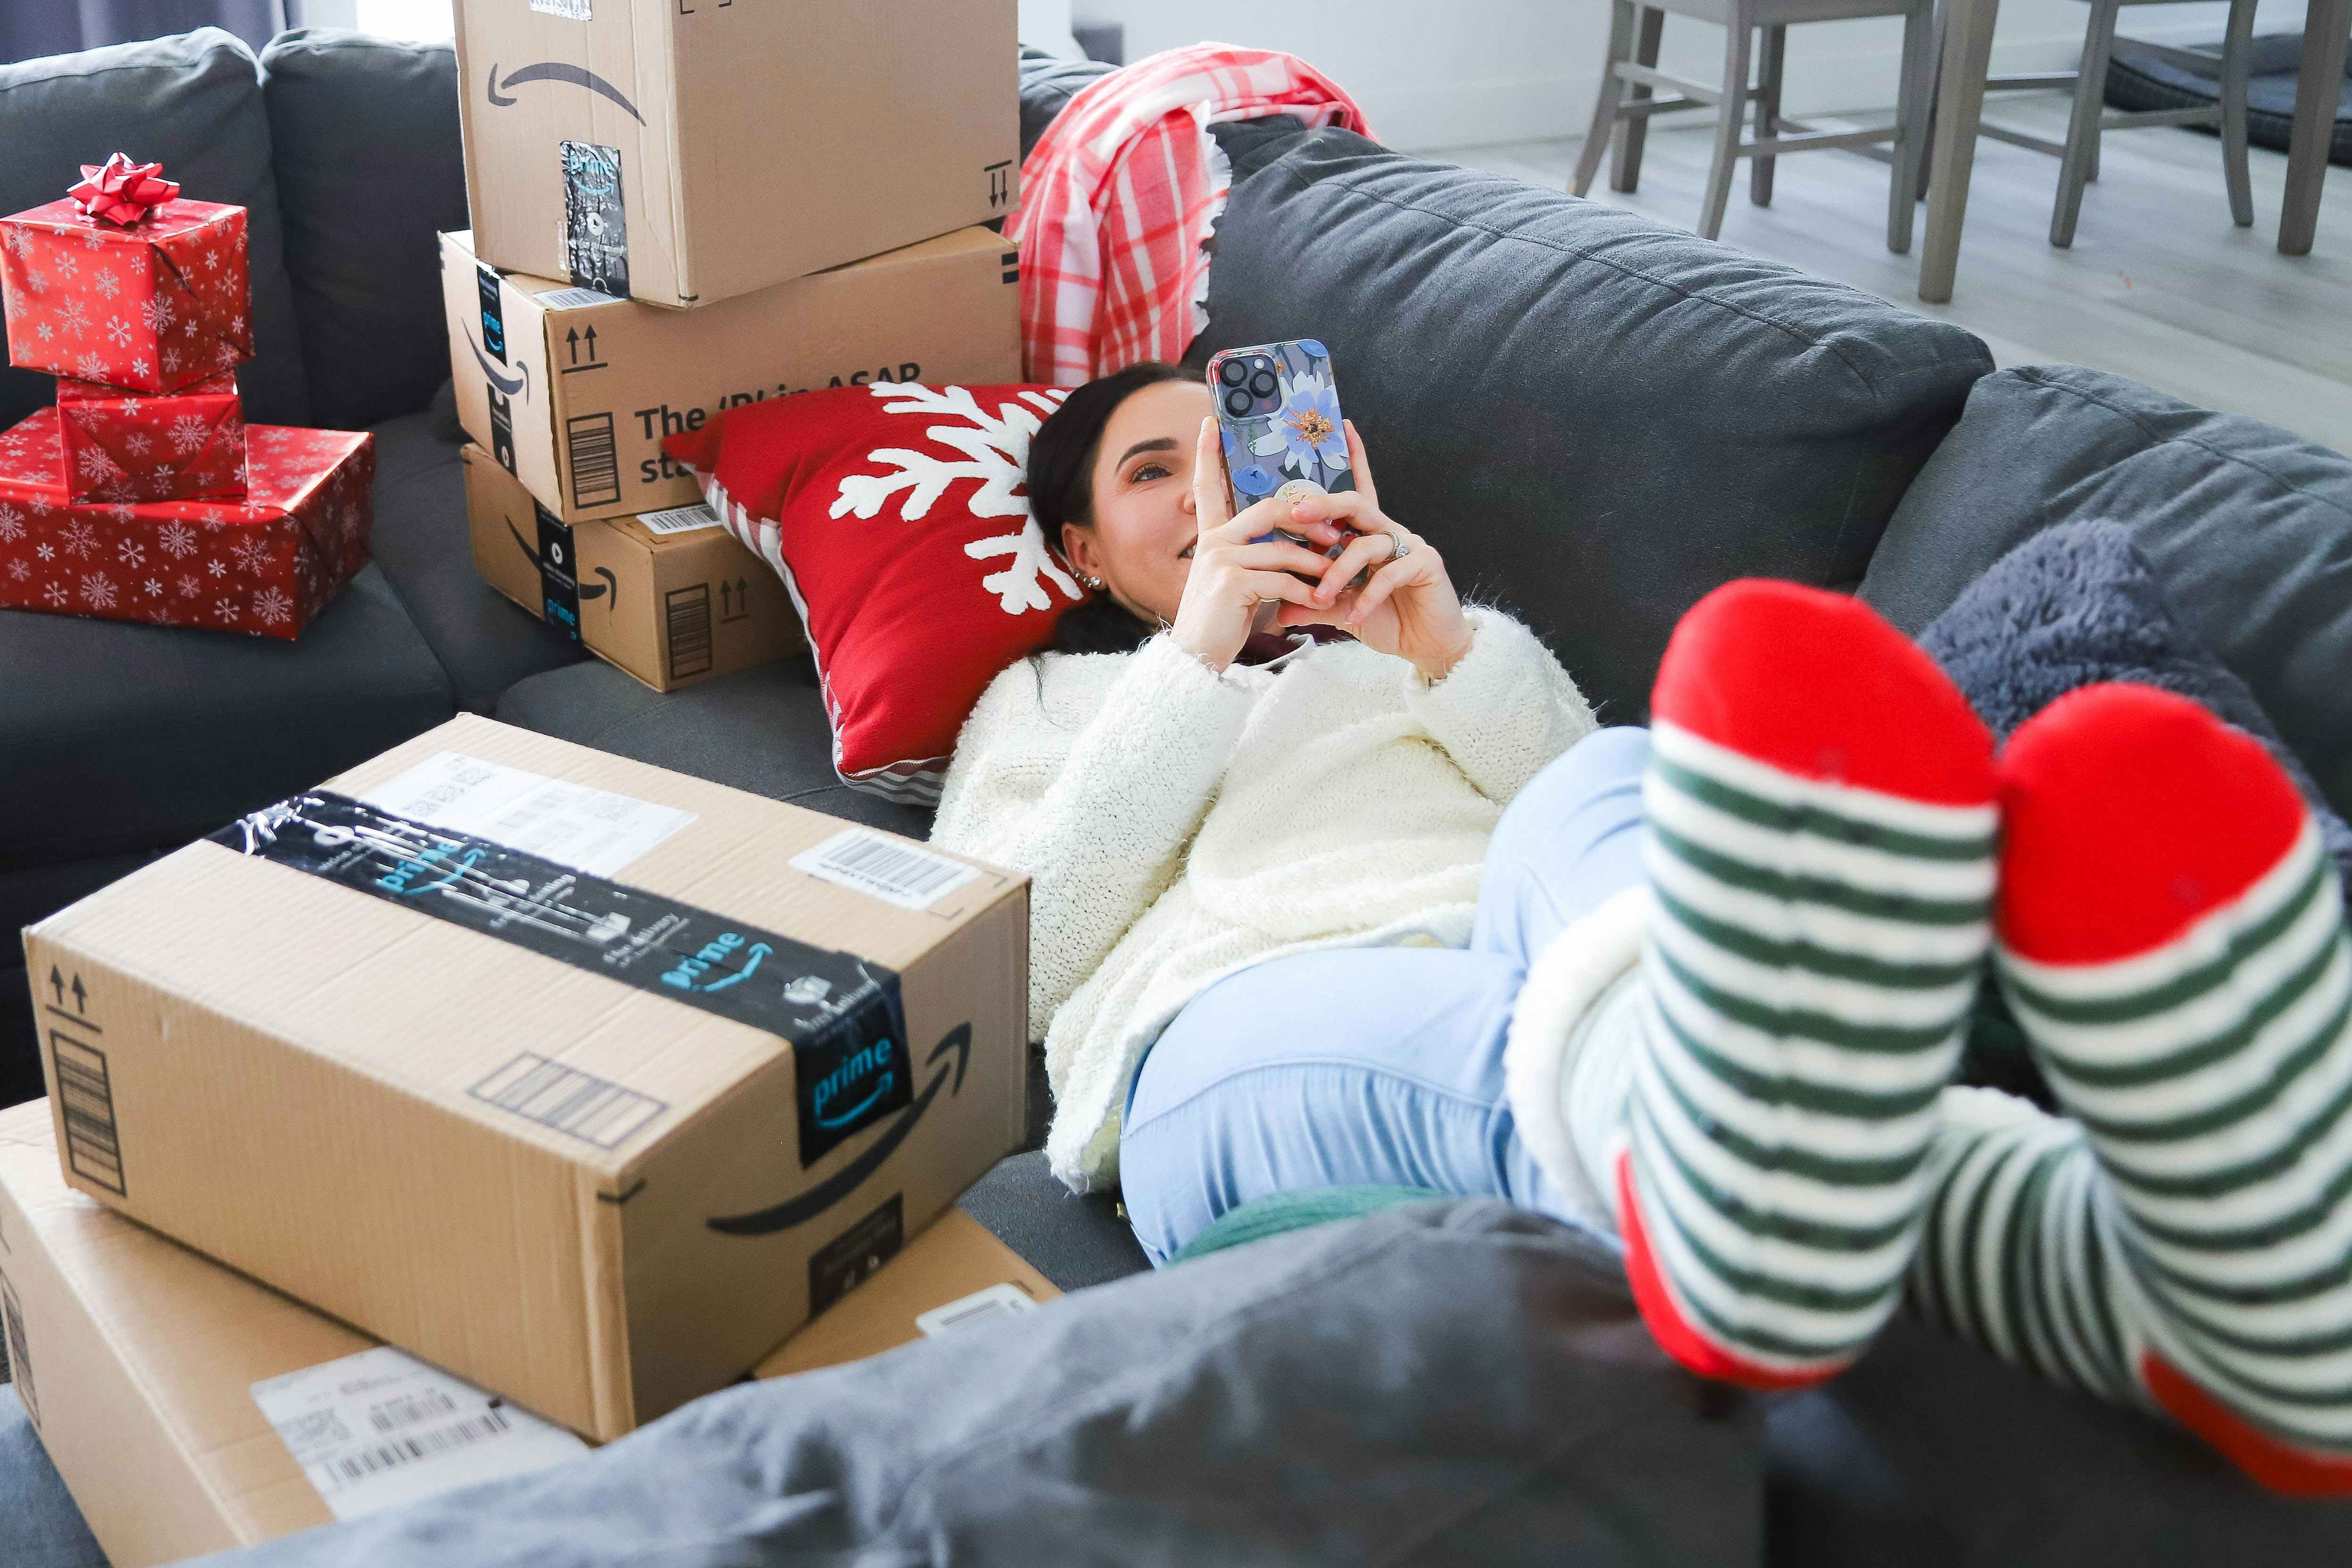 a woman looking at her phone while laying on couch near boxes 